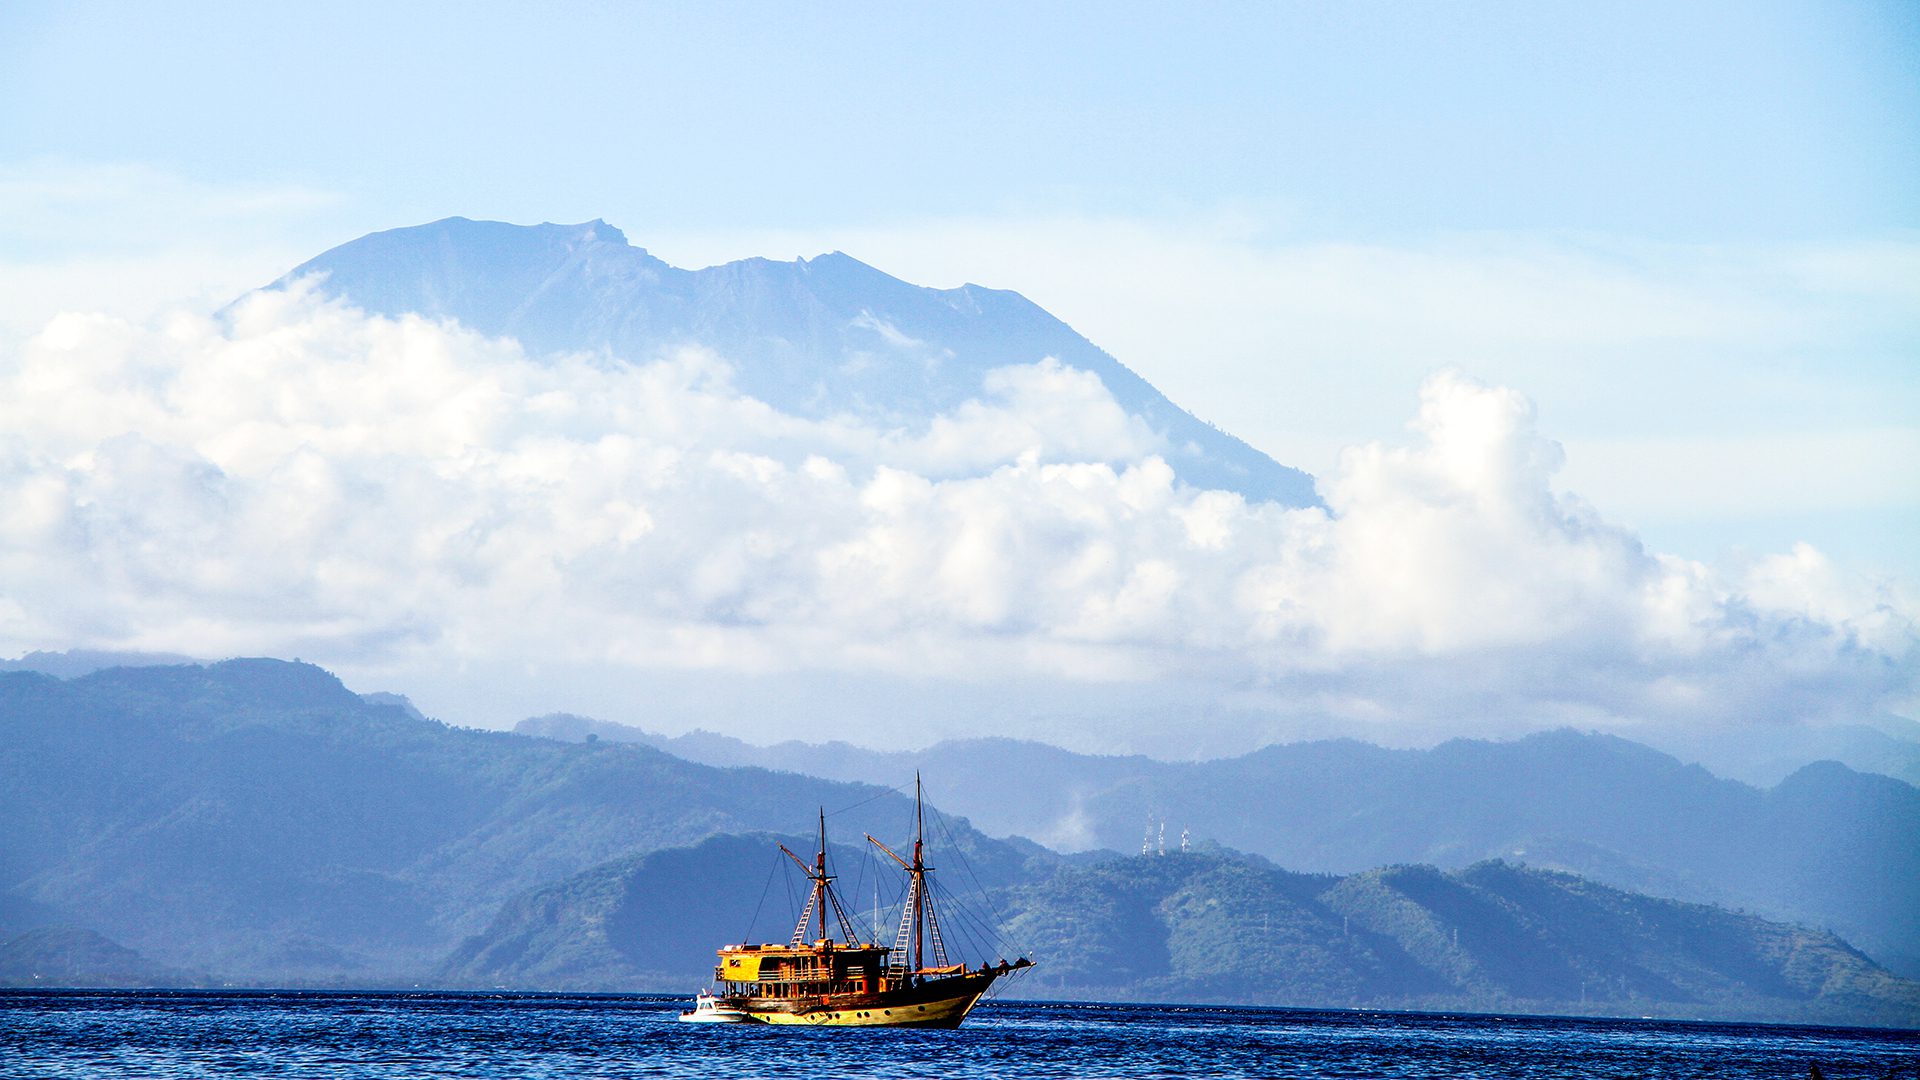 A liveaboard Penesi sailing ship cruises the waters off Nusa Lembongan in the shadow of the mighty Mt Agung